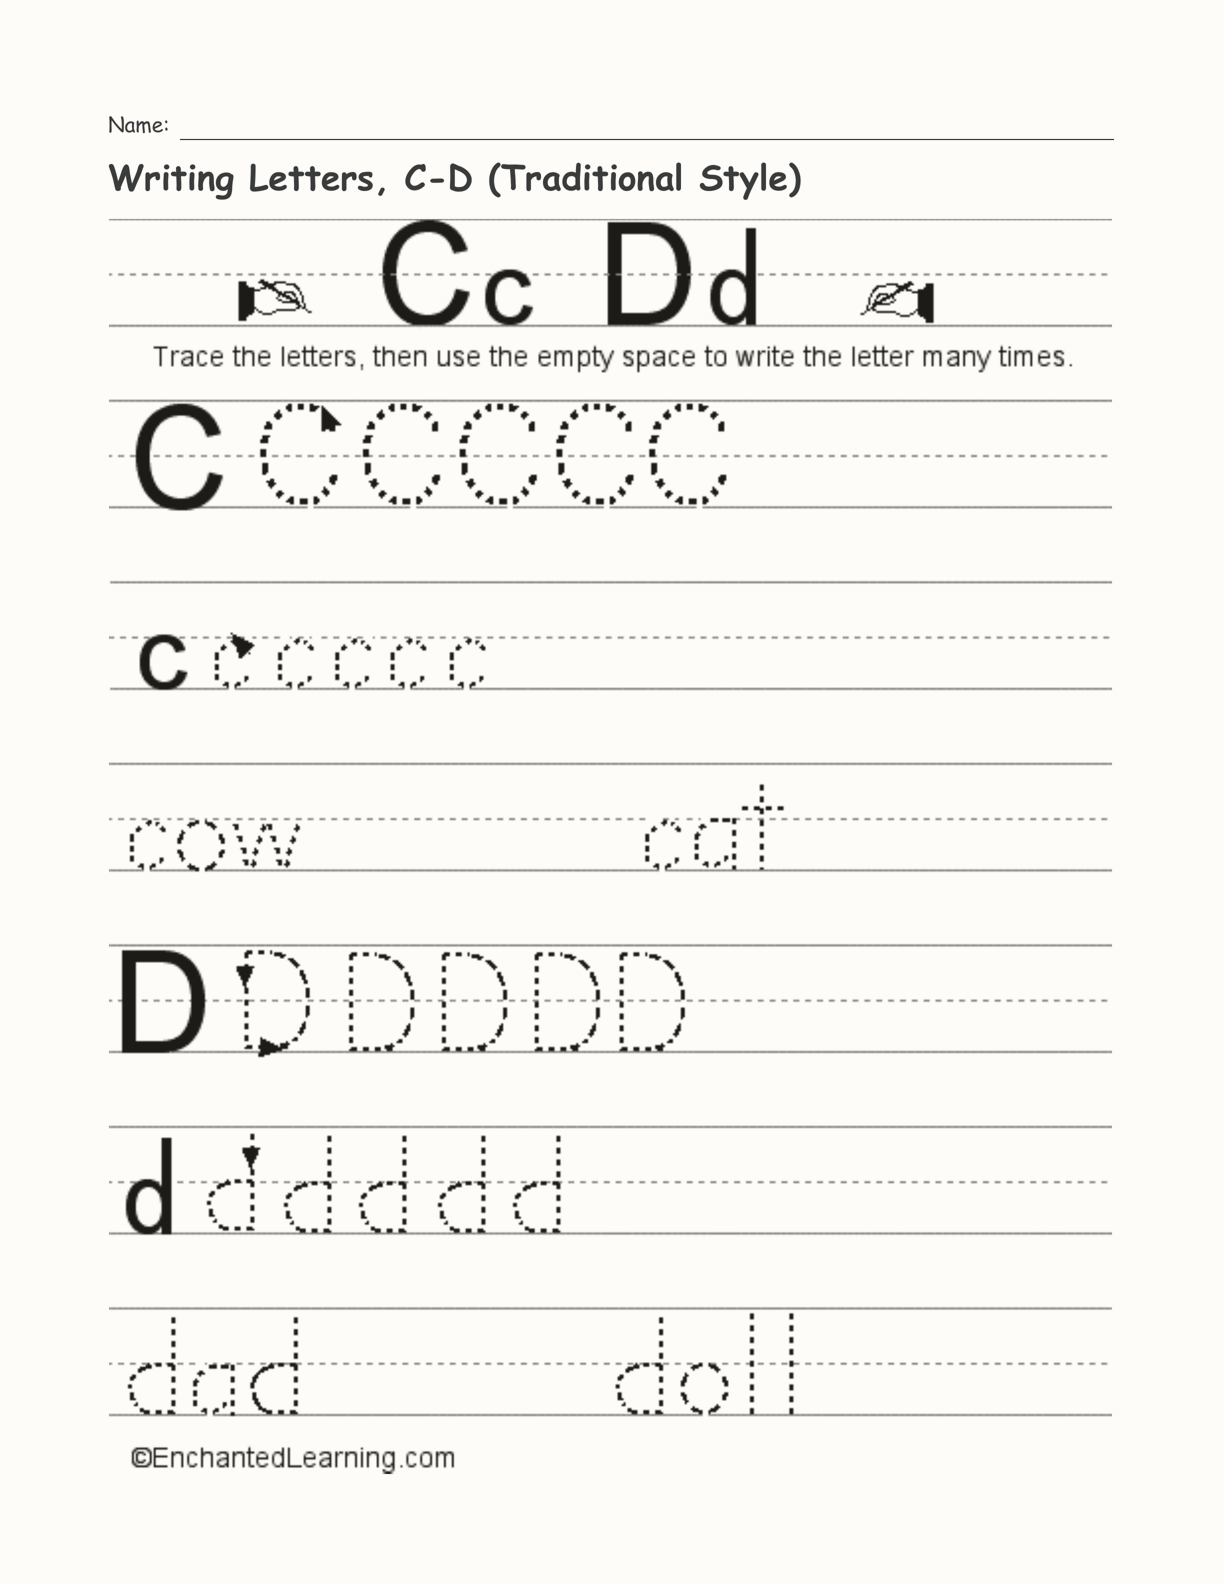 Writing Letters, C-D (Traditional Style) interactive worksheet page 1